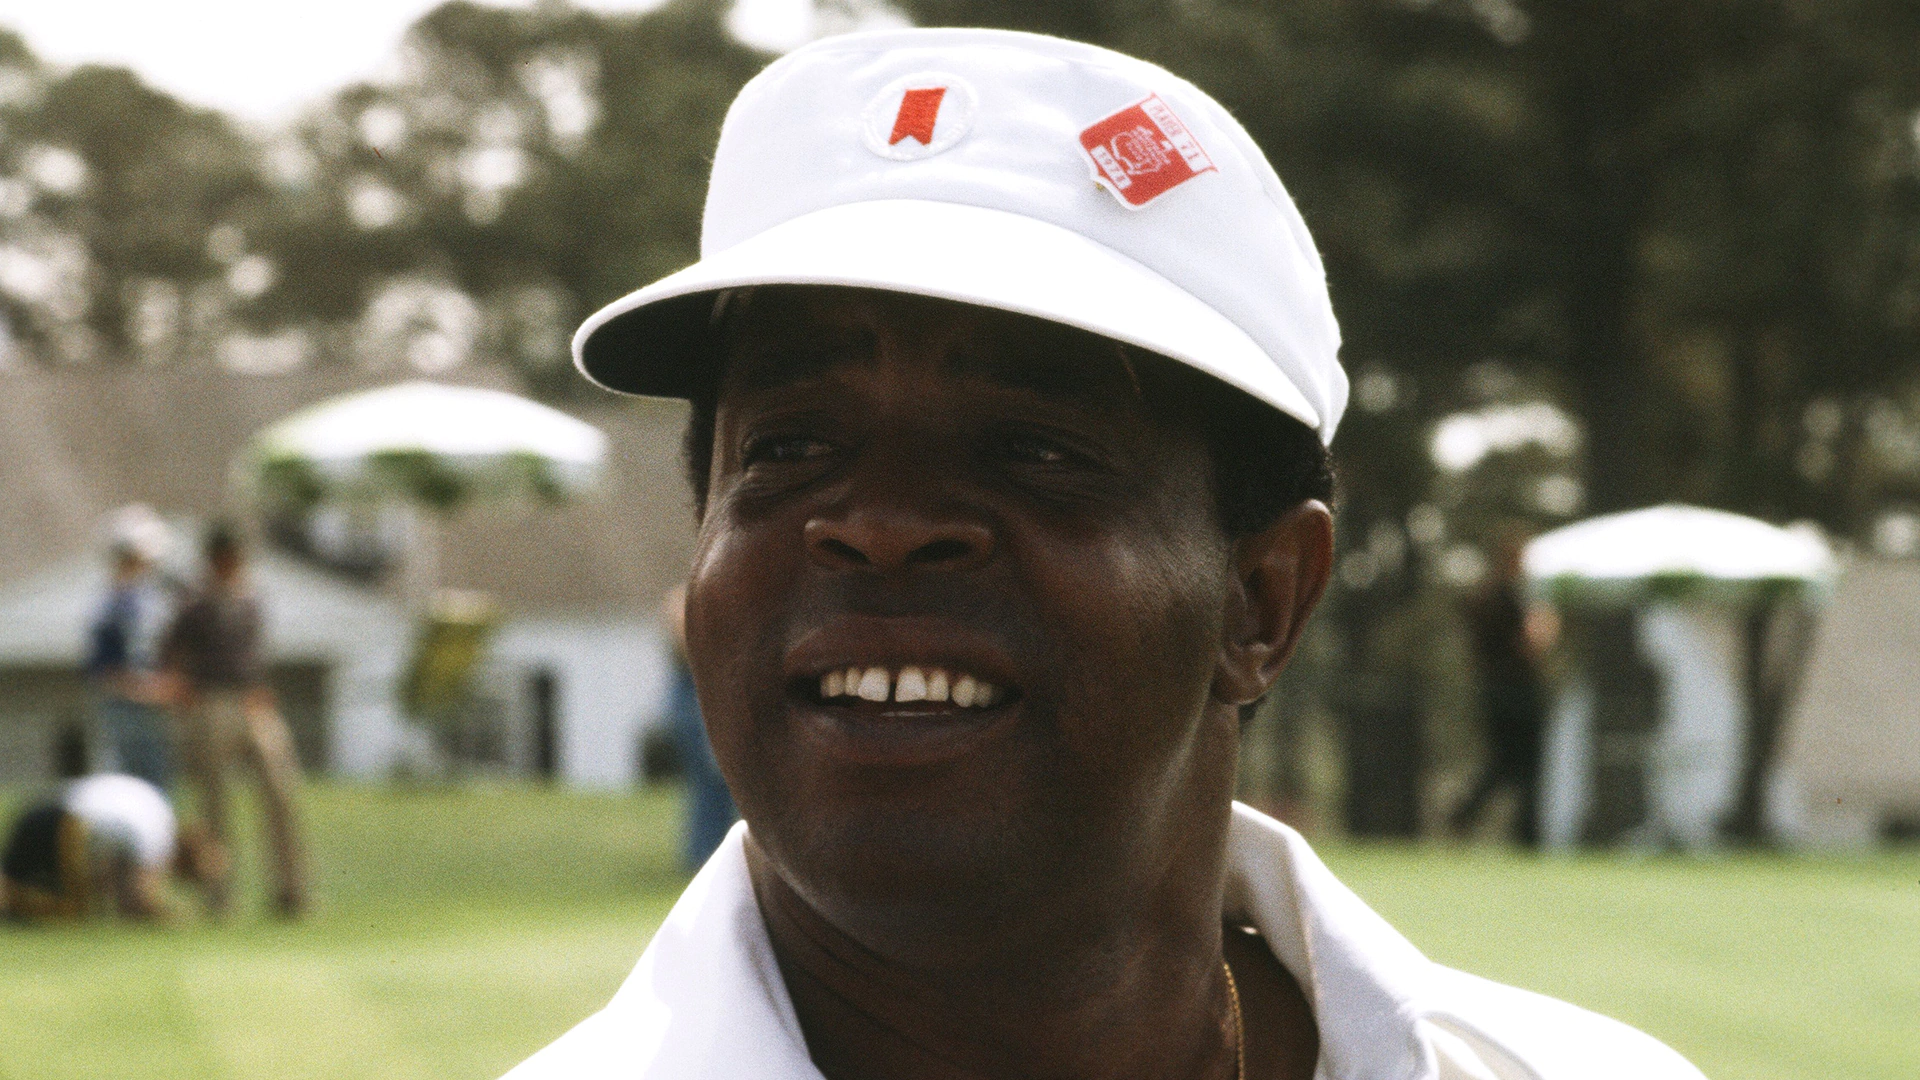 2020 Masters: Lee Elder, who broke color barrier at tournament, to become honorary starter starting in 2021